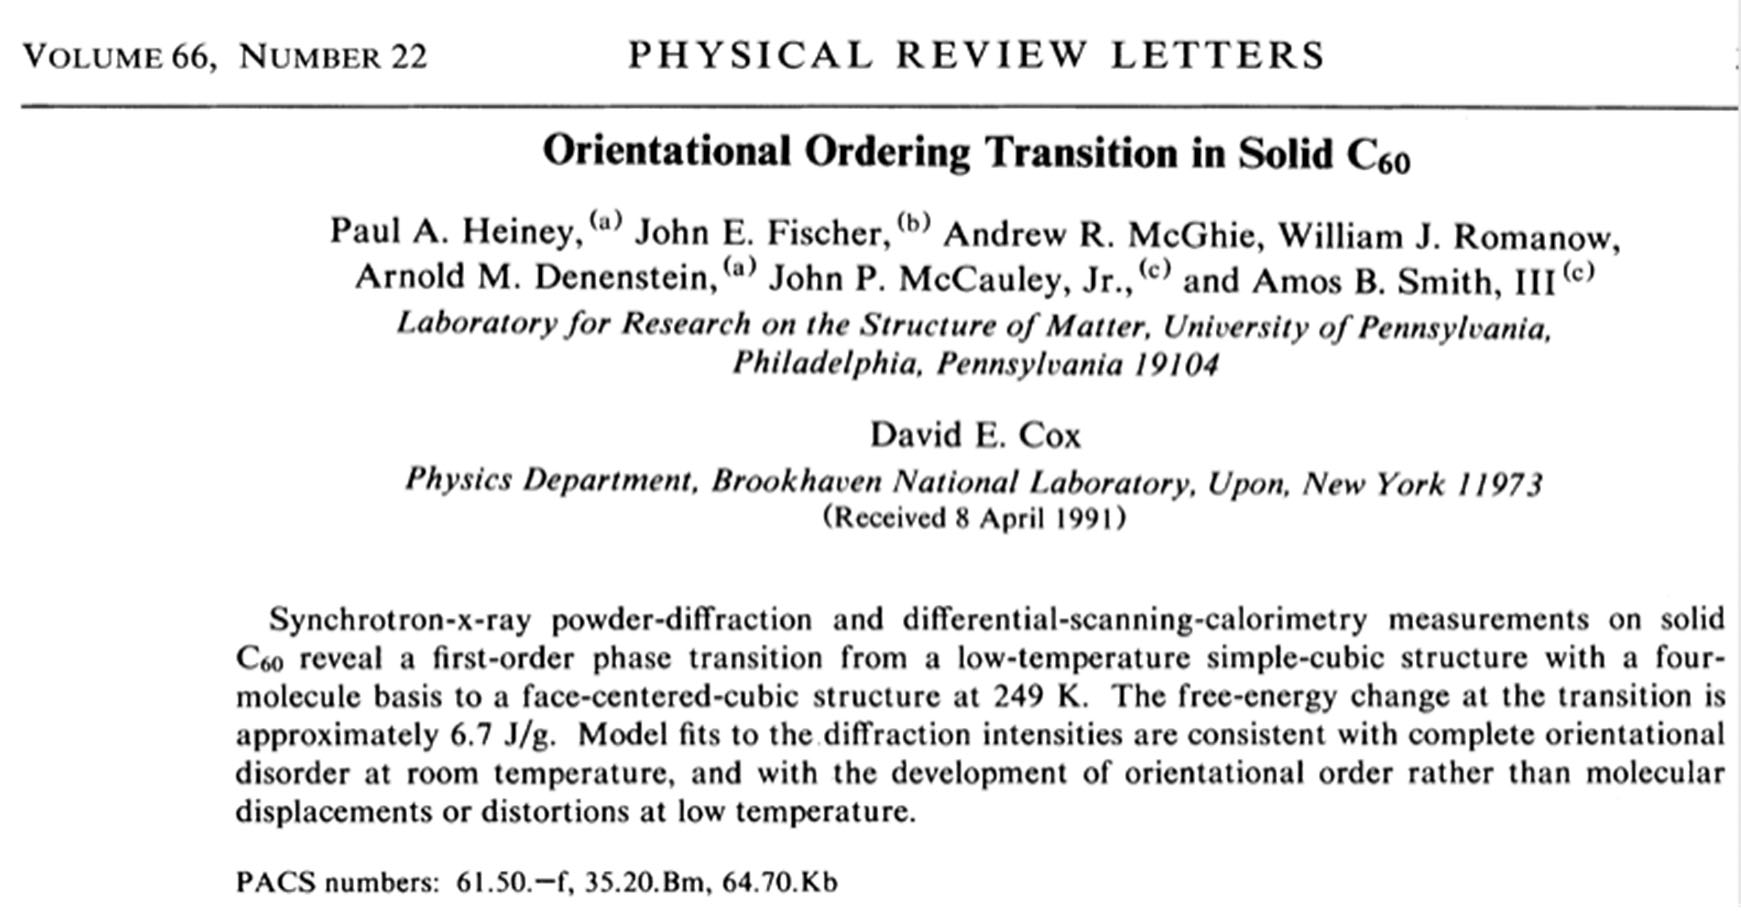 Orientational Ordering Transition in Solid C60 article image